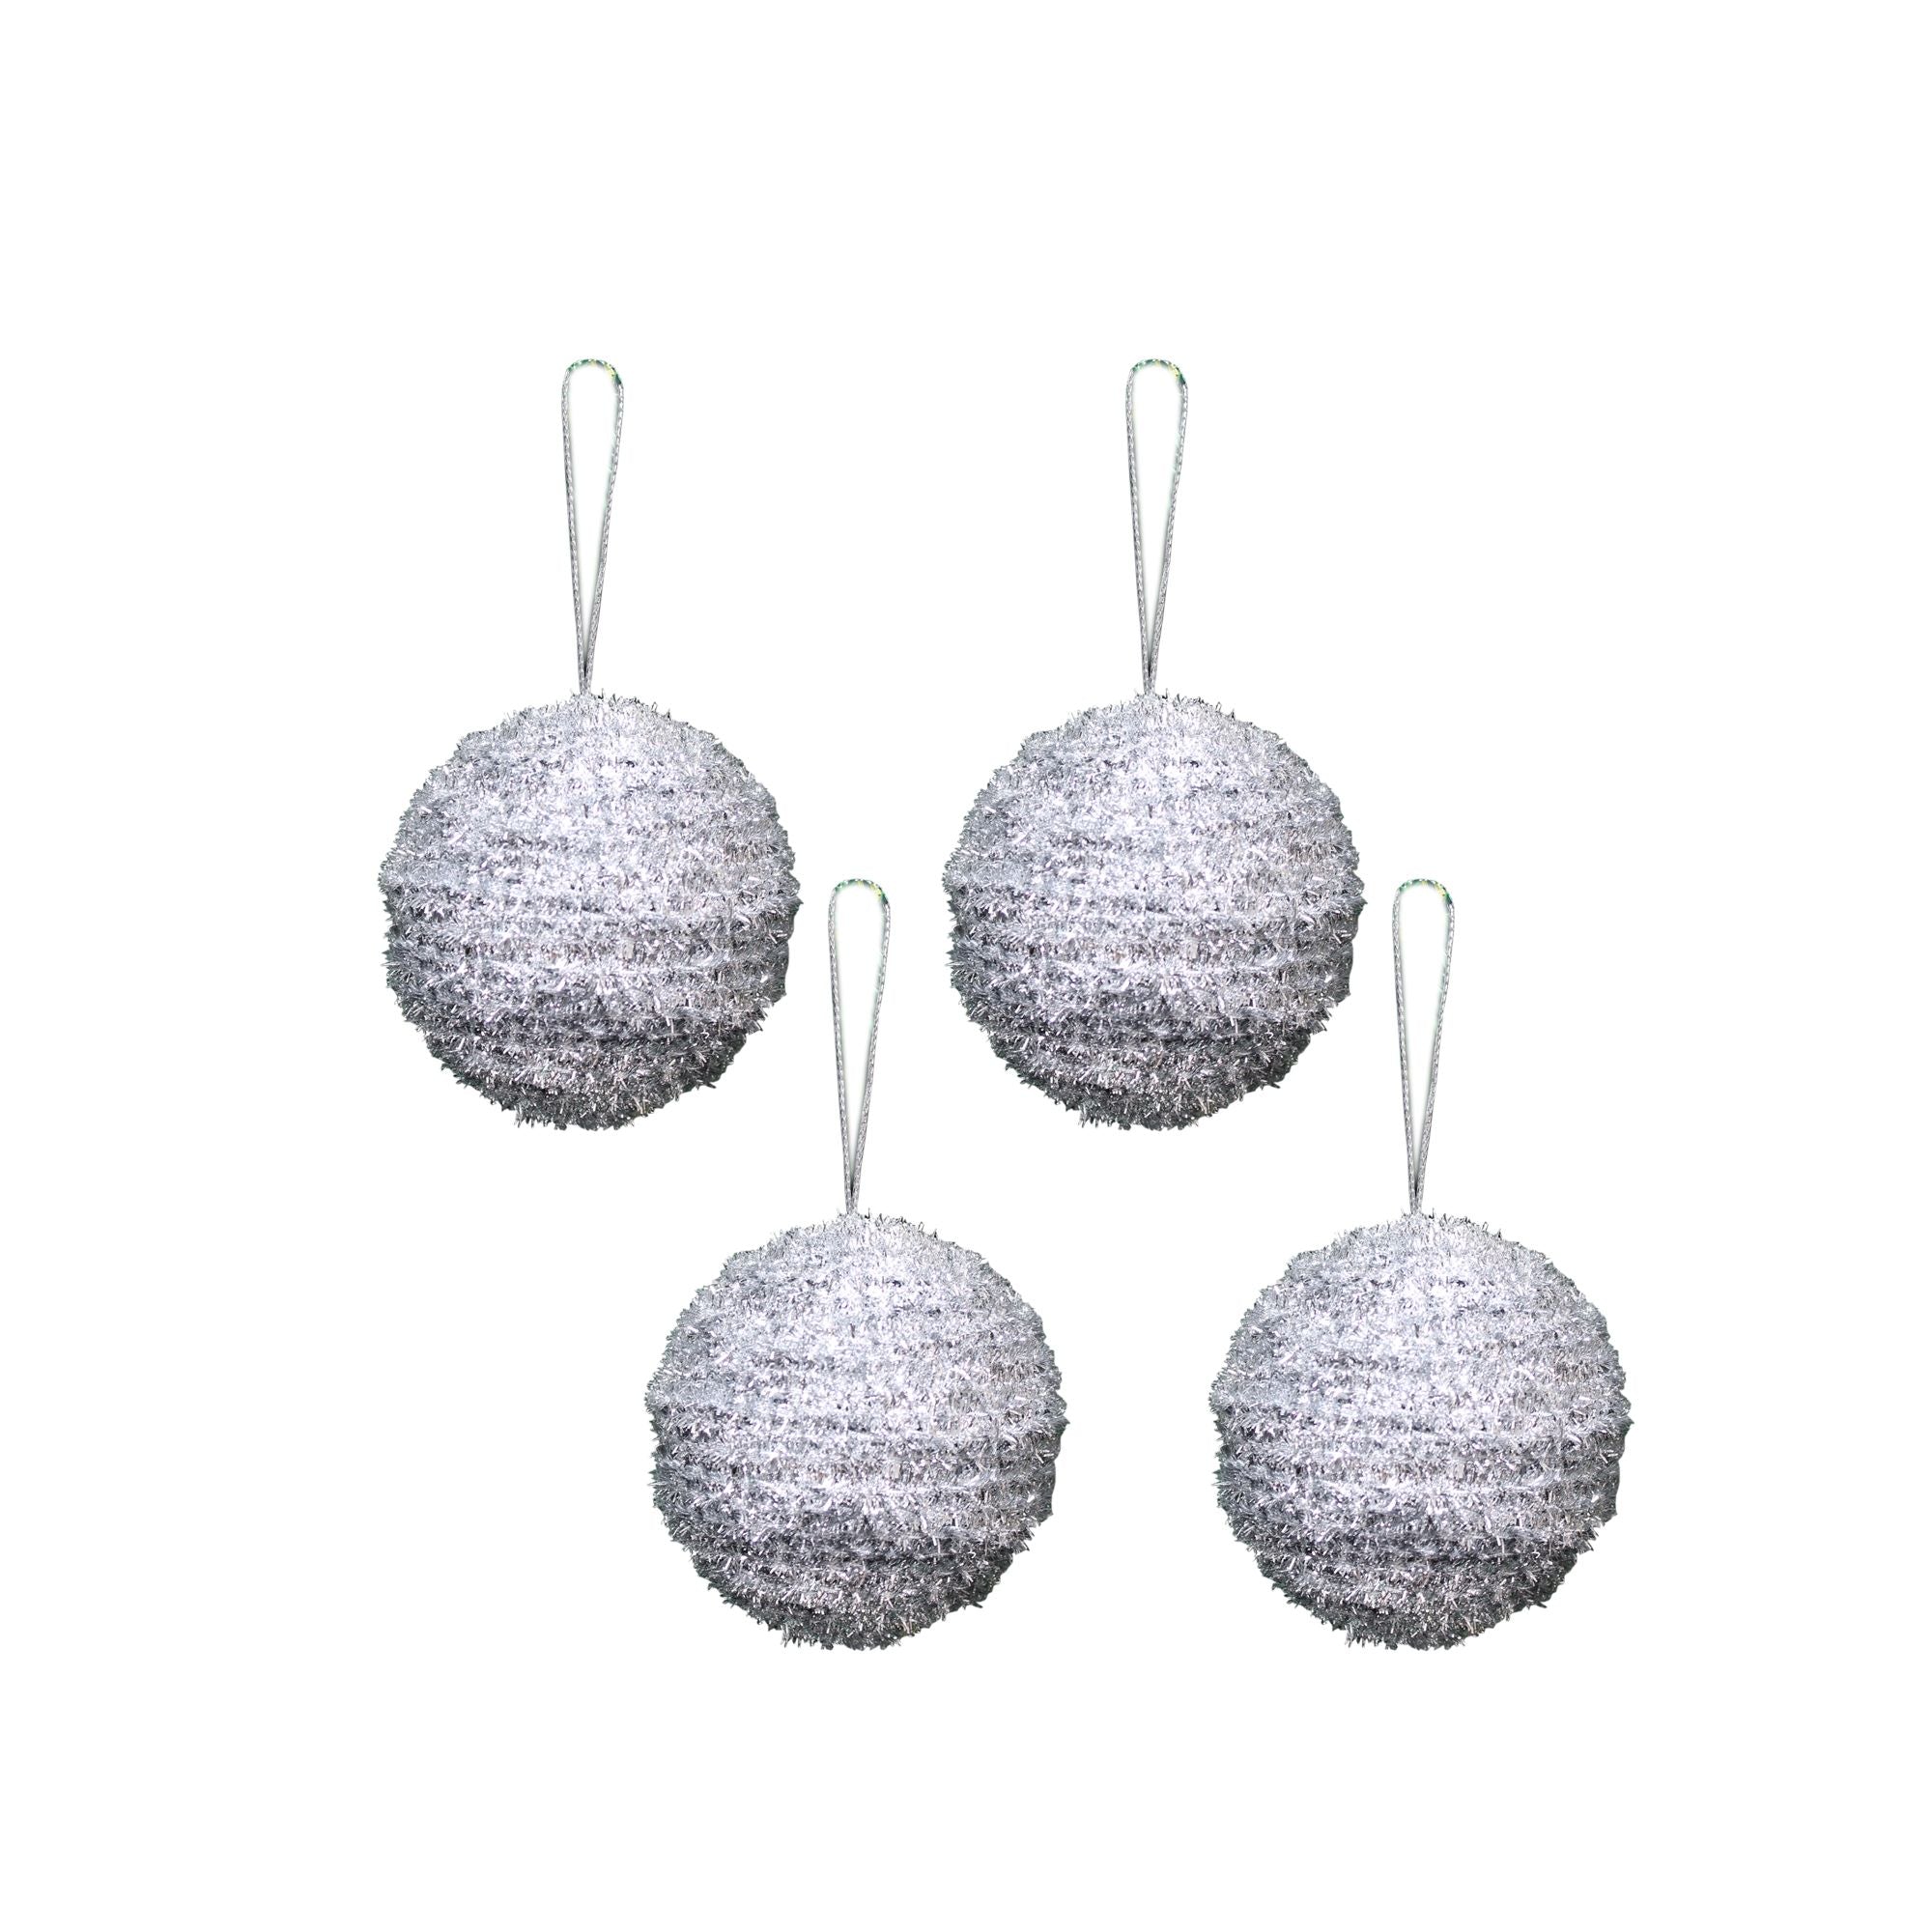 Handmade Christmas Ornaments - Tinsel Baubles - 50mm, Silver, 4pc